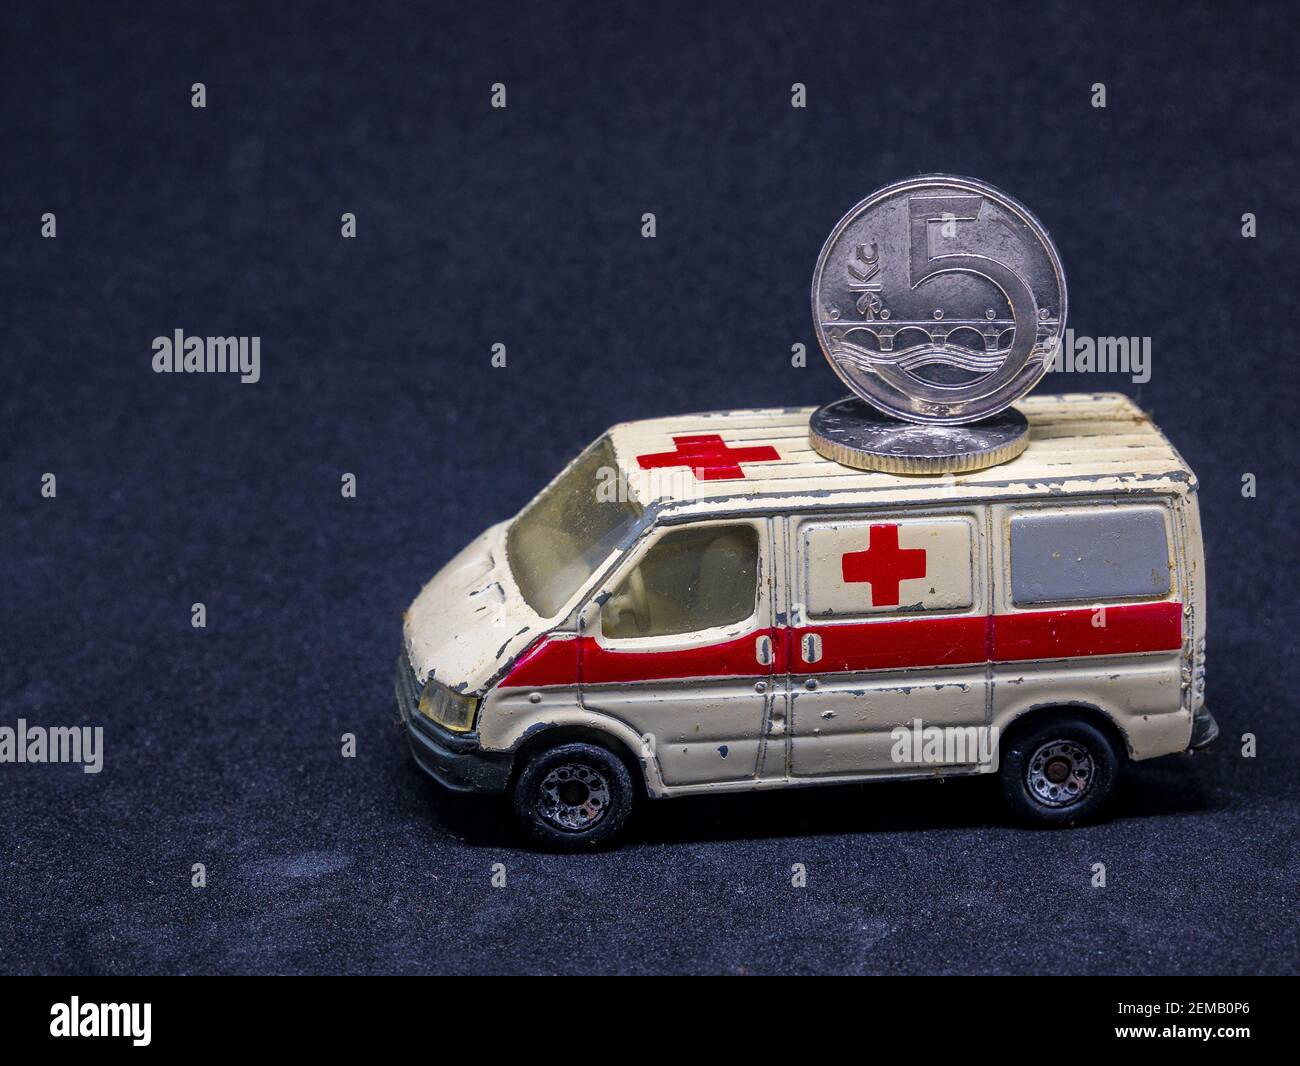 Usti nad Labem / Czech Republic - 11.29.2019: Old dusty ambulance toy car  with coin on it's roof - coin are Czech koruna Stock Photo - Alamy